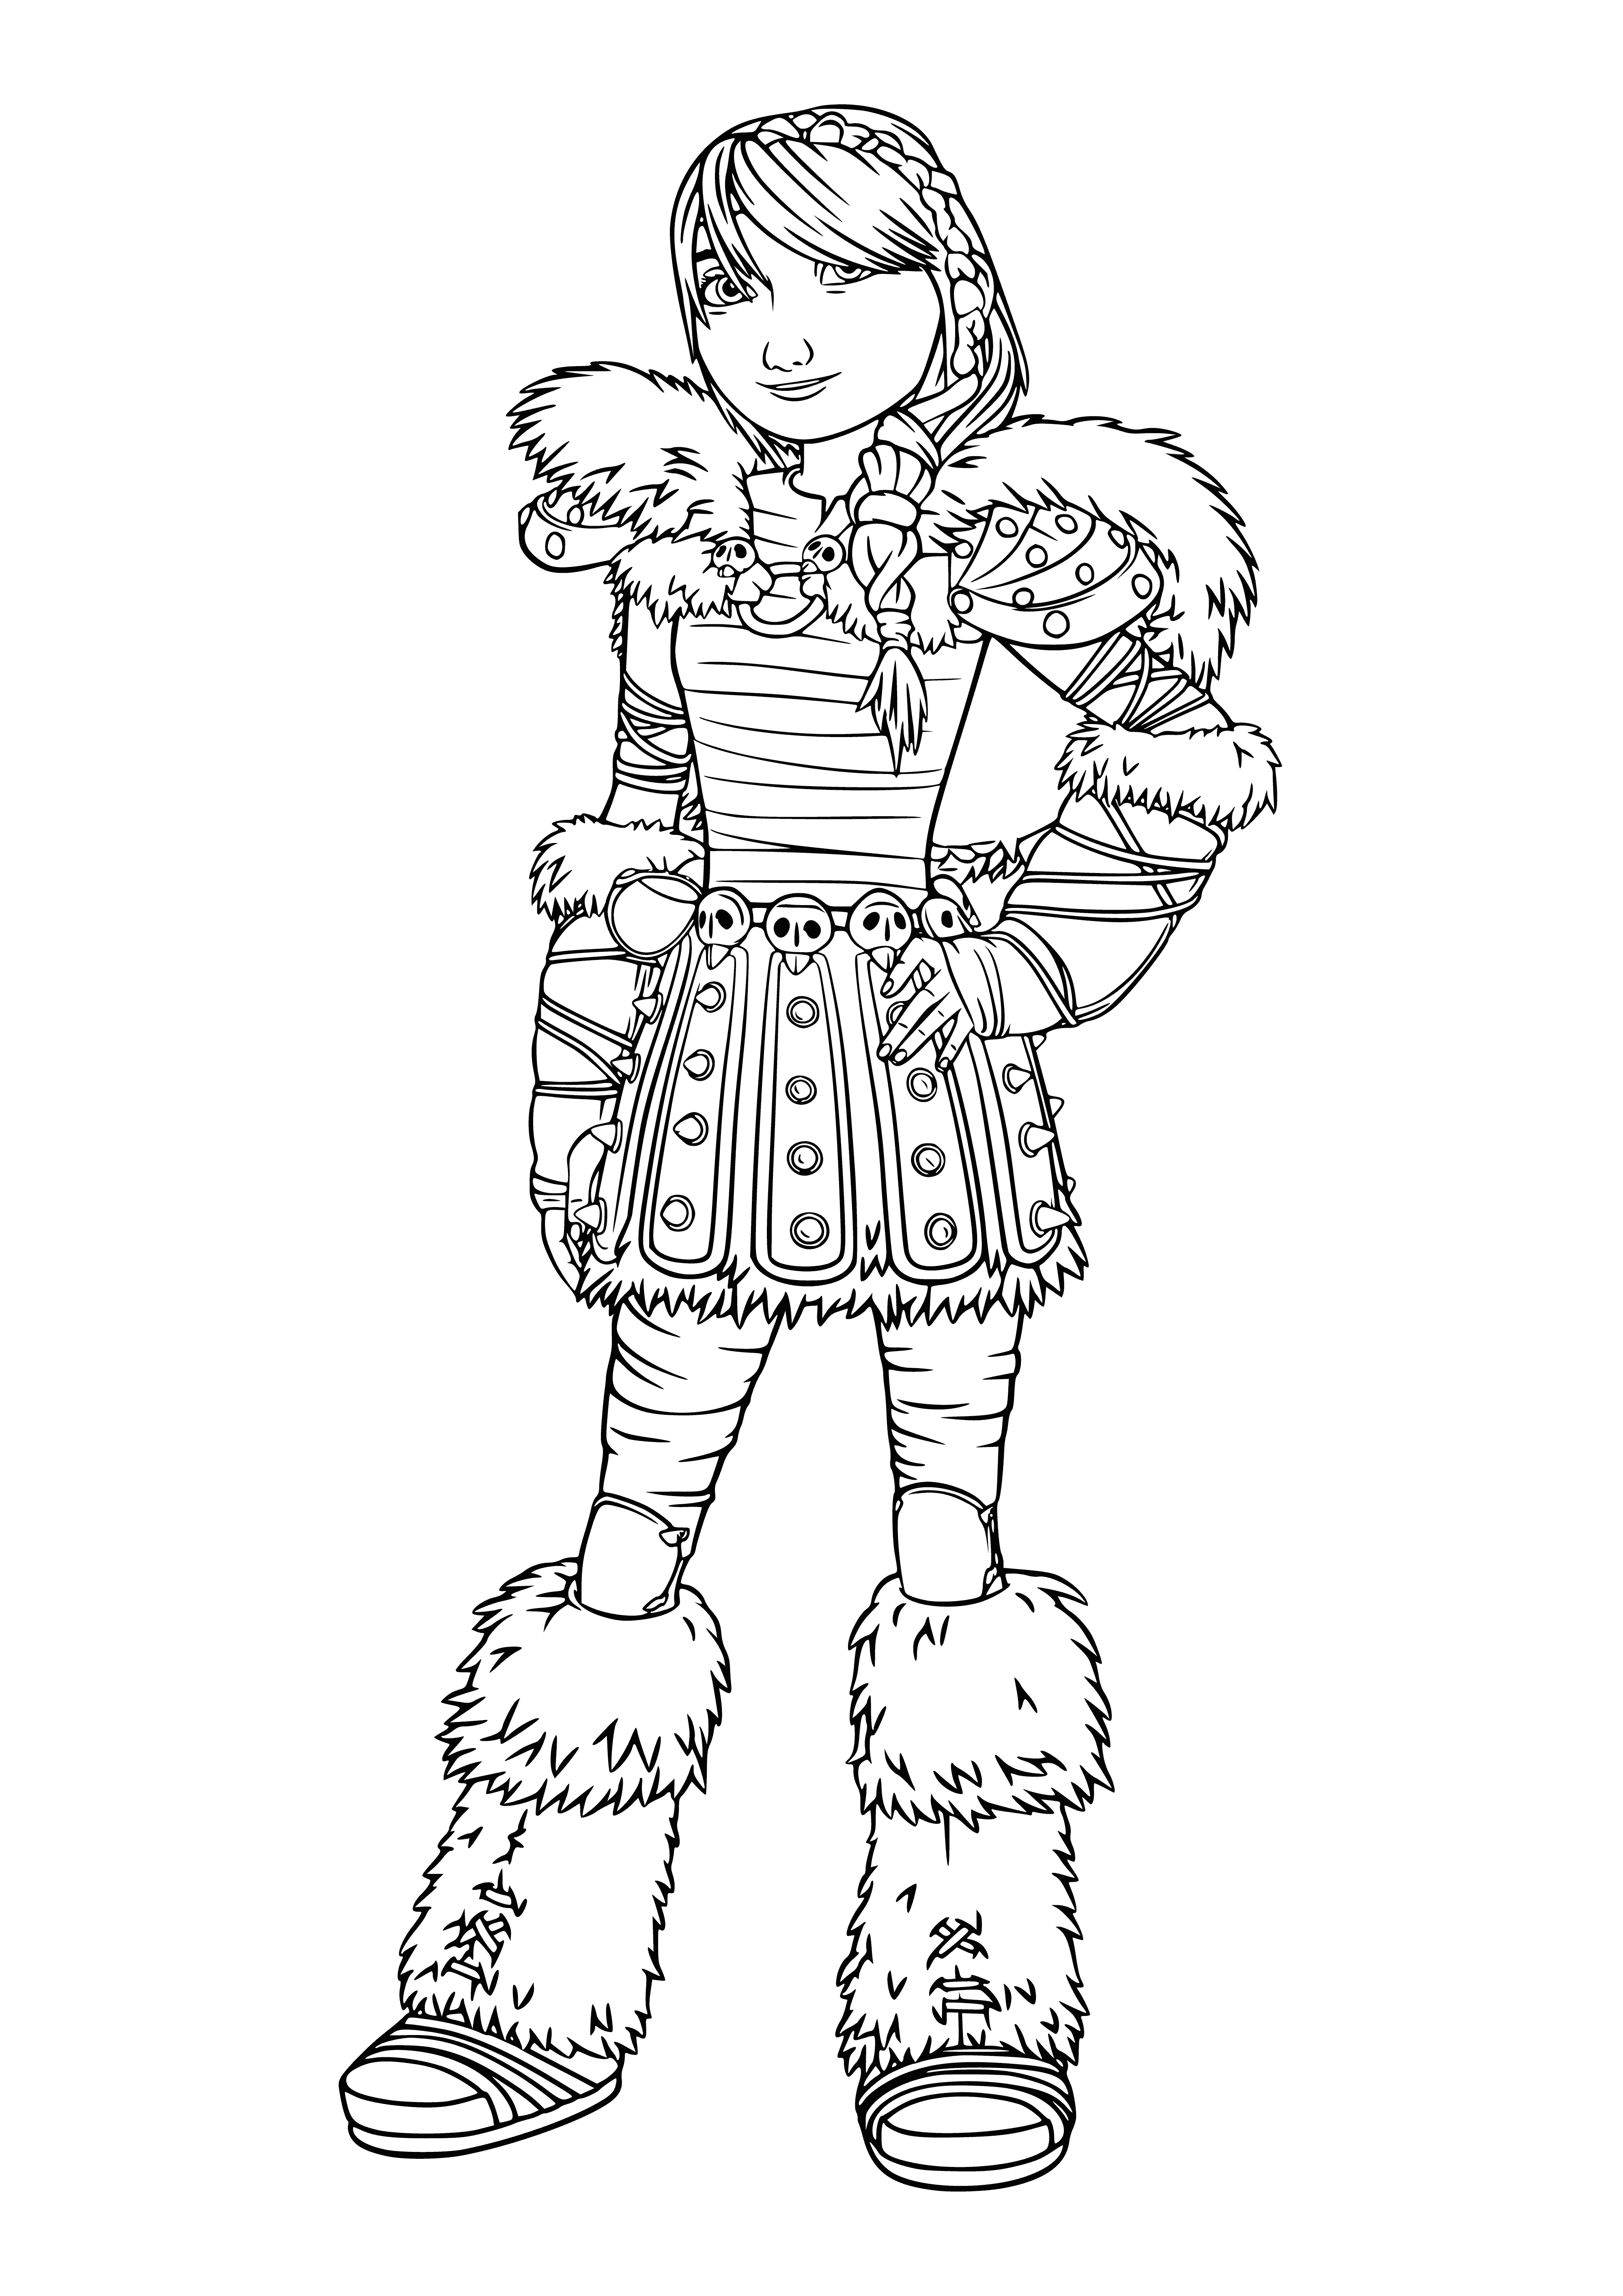 coloring page: Brave Viking warrior Astrid is Hiccup's love interest and Valka's advisor and friend.